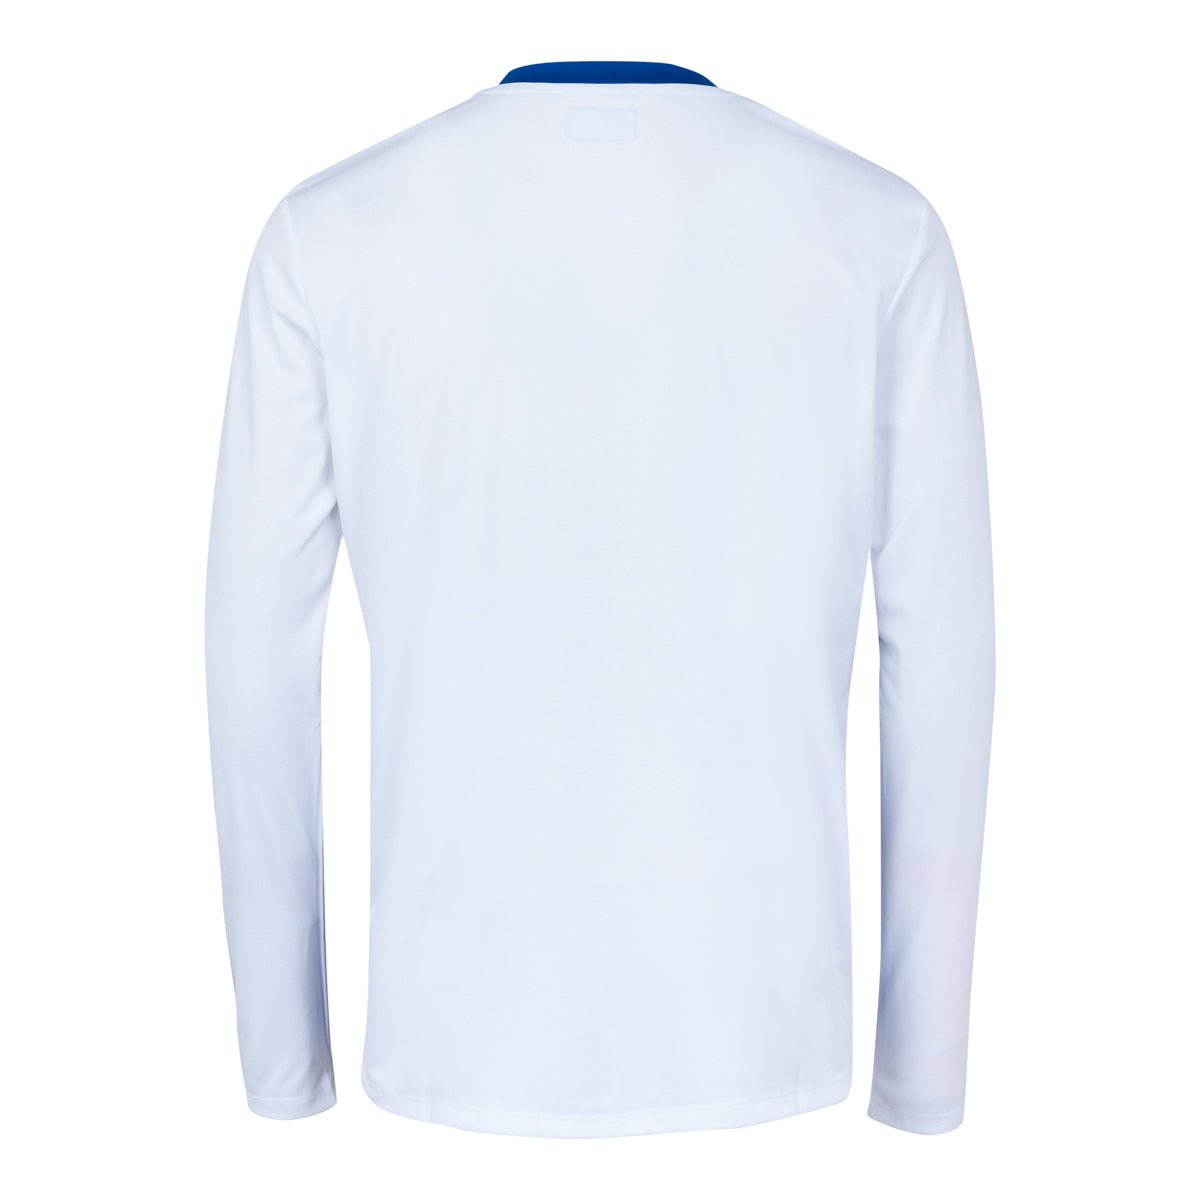 Maillot Football Caserne Blanc Homme - Image 2